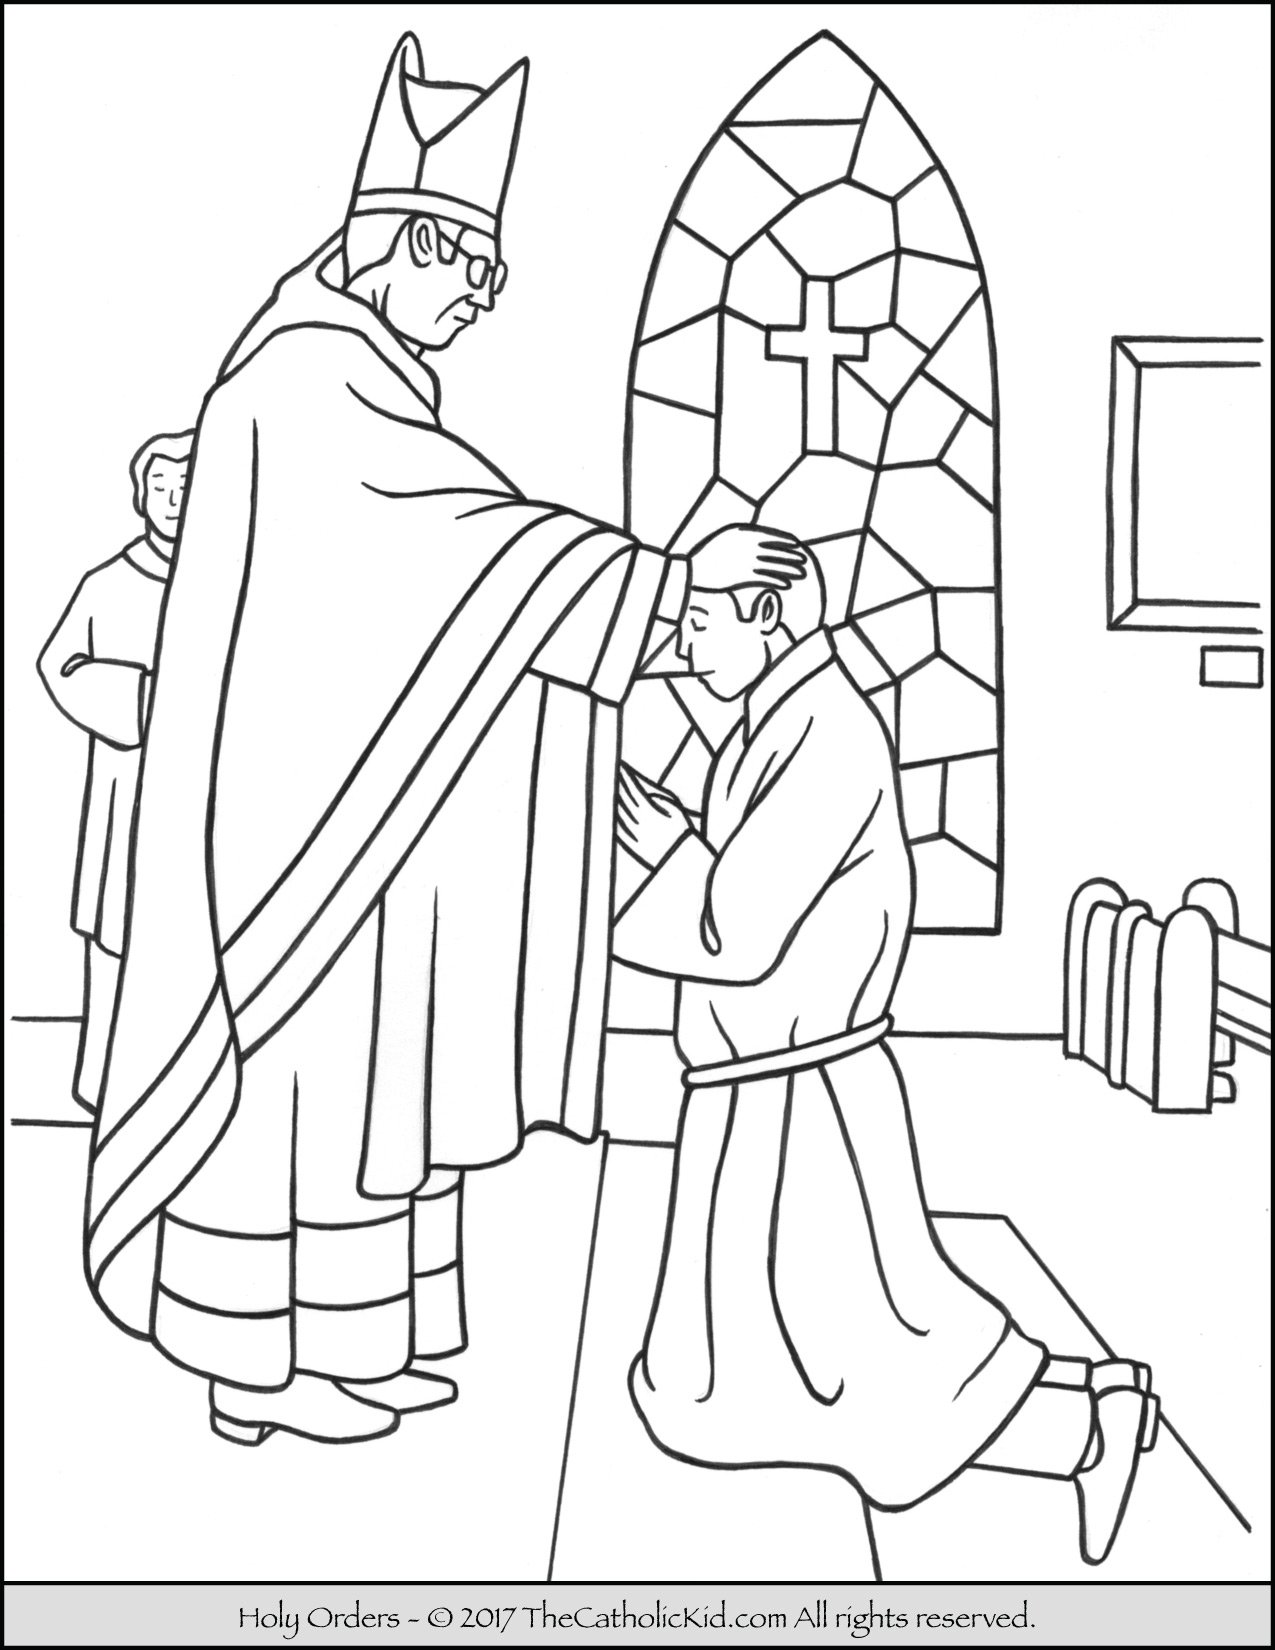 Sacrament of Holy Orders Coloring Page - TheCatholicKid.com